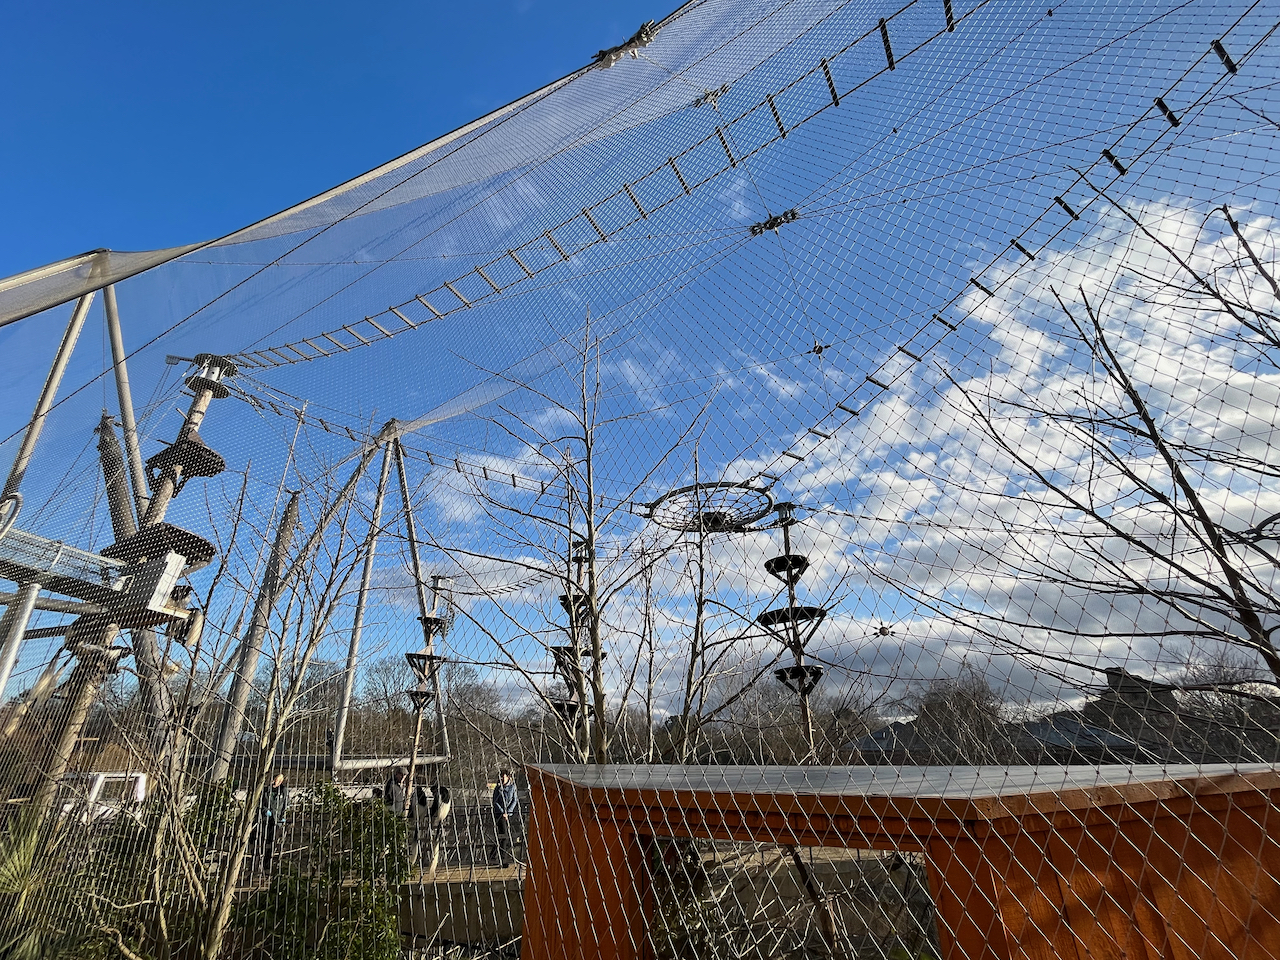 The large aviary in Monkey Valley at London Zoo. Within the mesh structure are high rope ladders, tall towers and other objects for the monkeys to swing and clamber over.